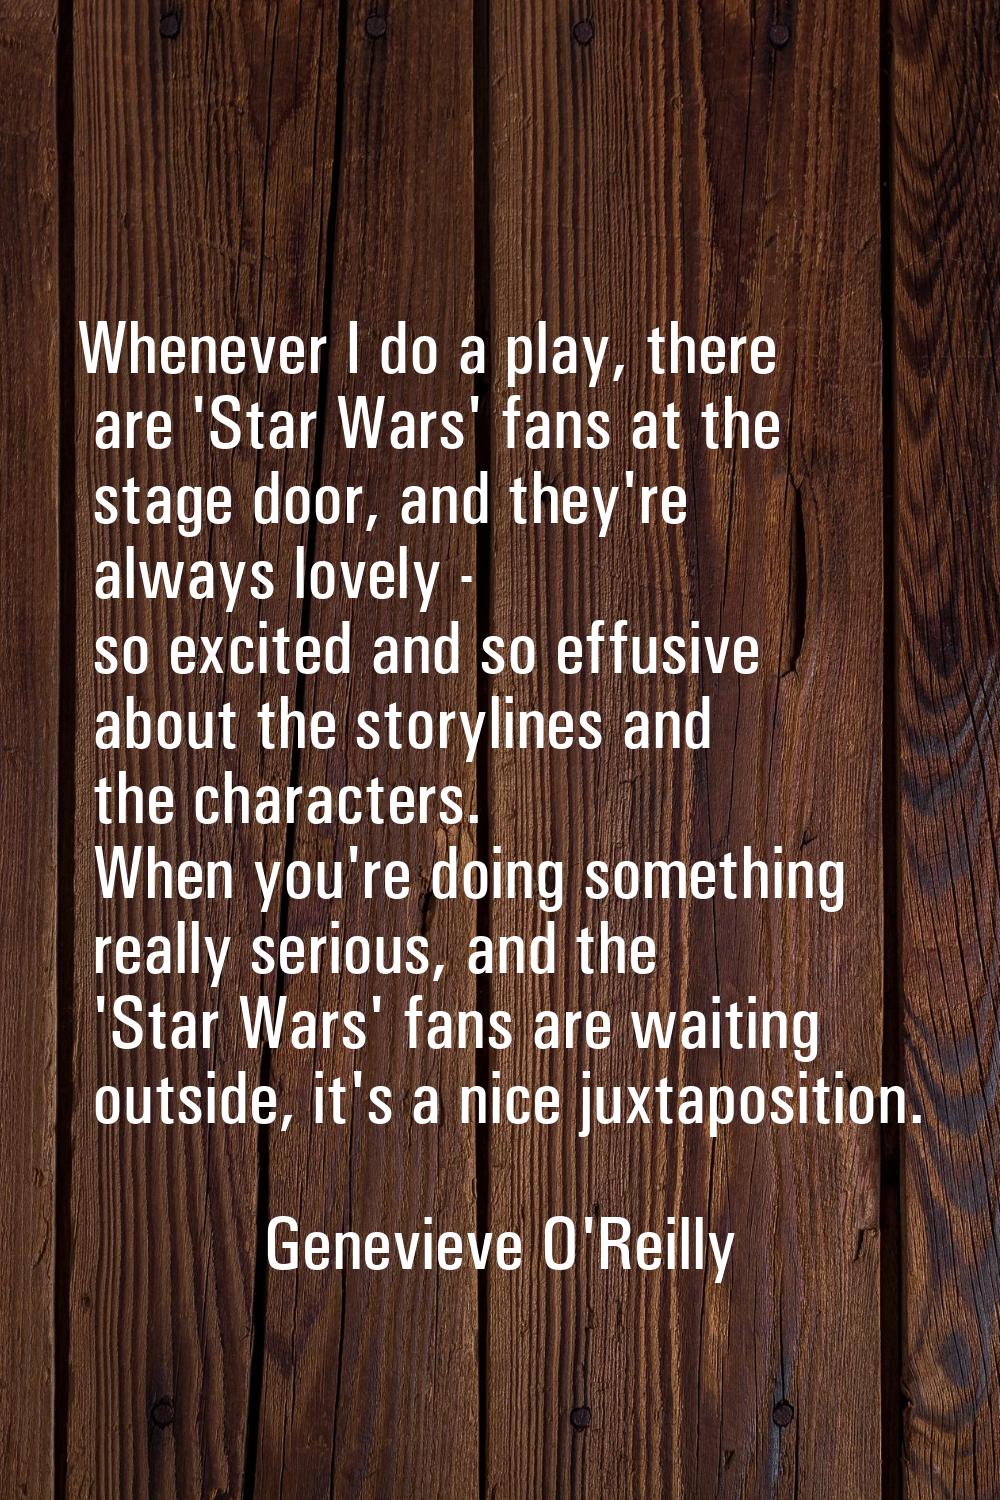 Whenever I do a play, there are 'Star Wars' fans at the stage door, and they're always lovely - so 